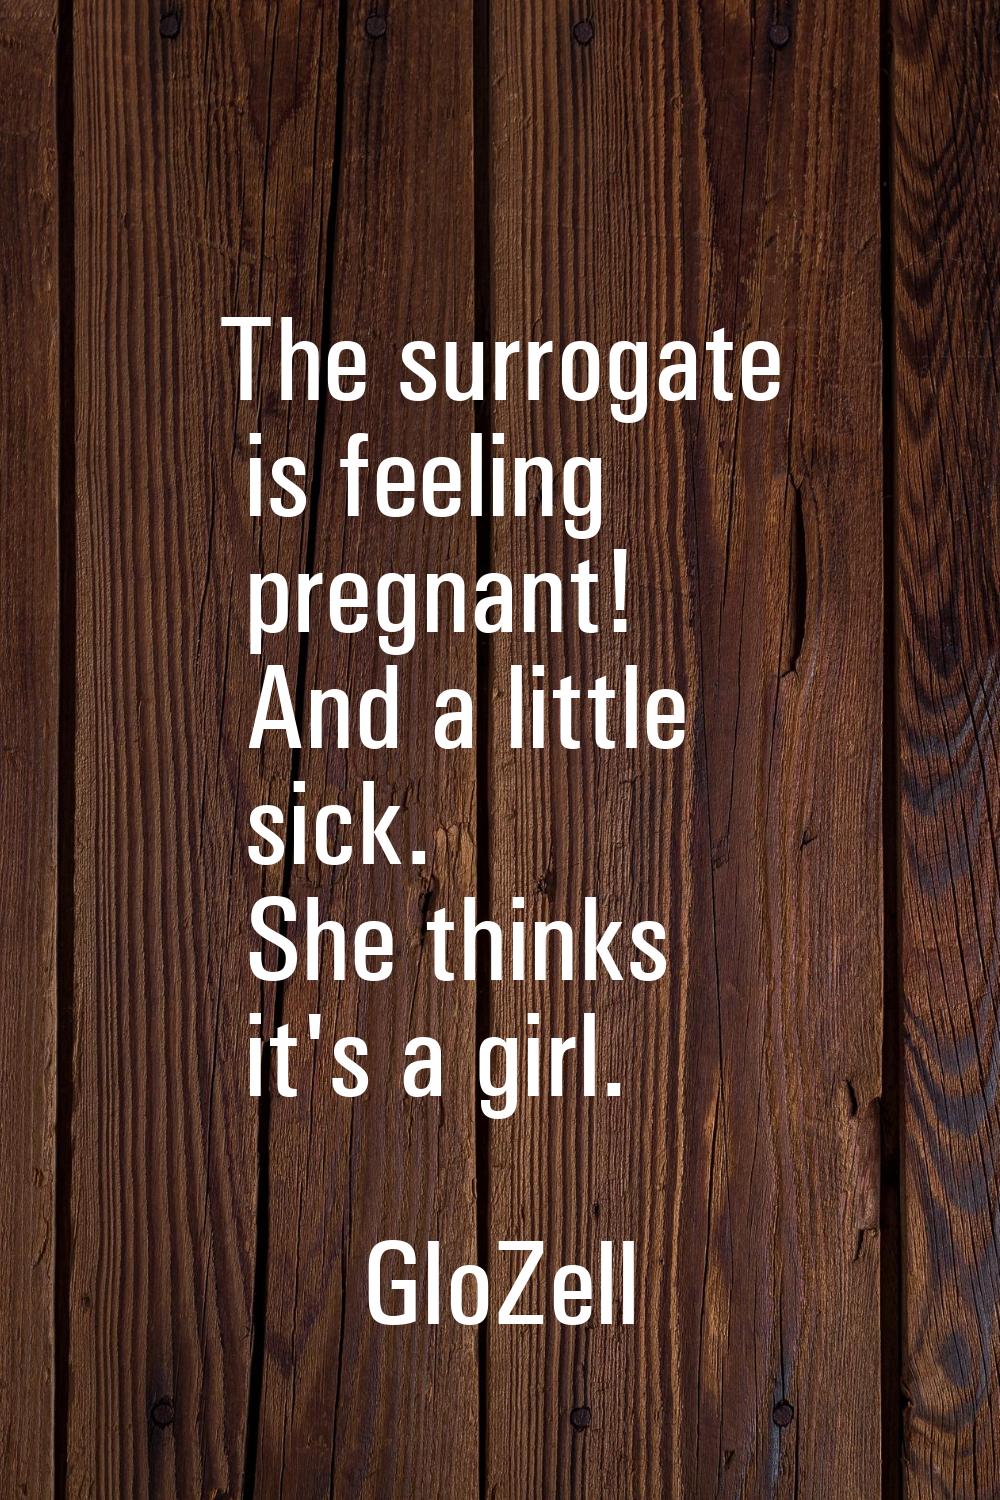 The surrogate is feeling pregnant! And a little sick. She thinks it's a girl.